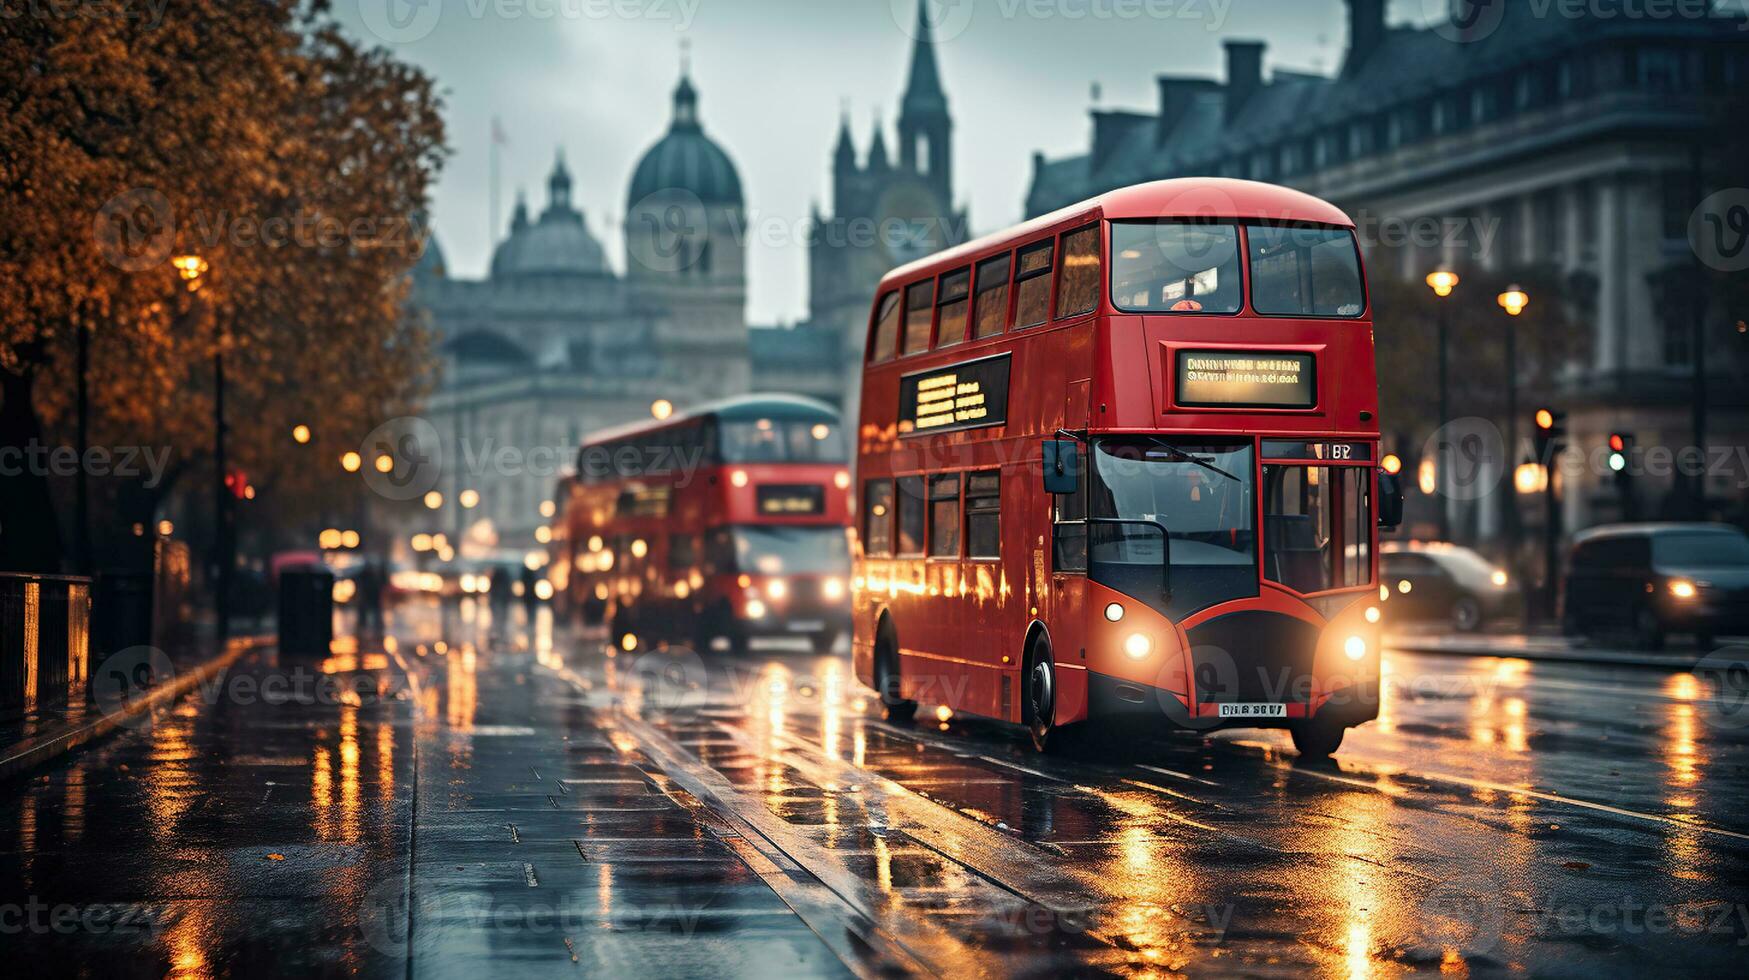 The Iconic Double Decker Bus Graces the Wet Streets photo